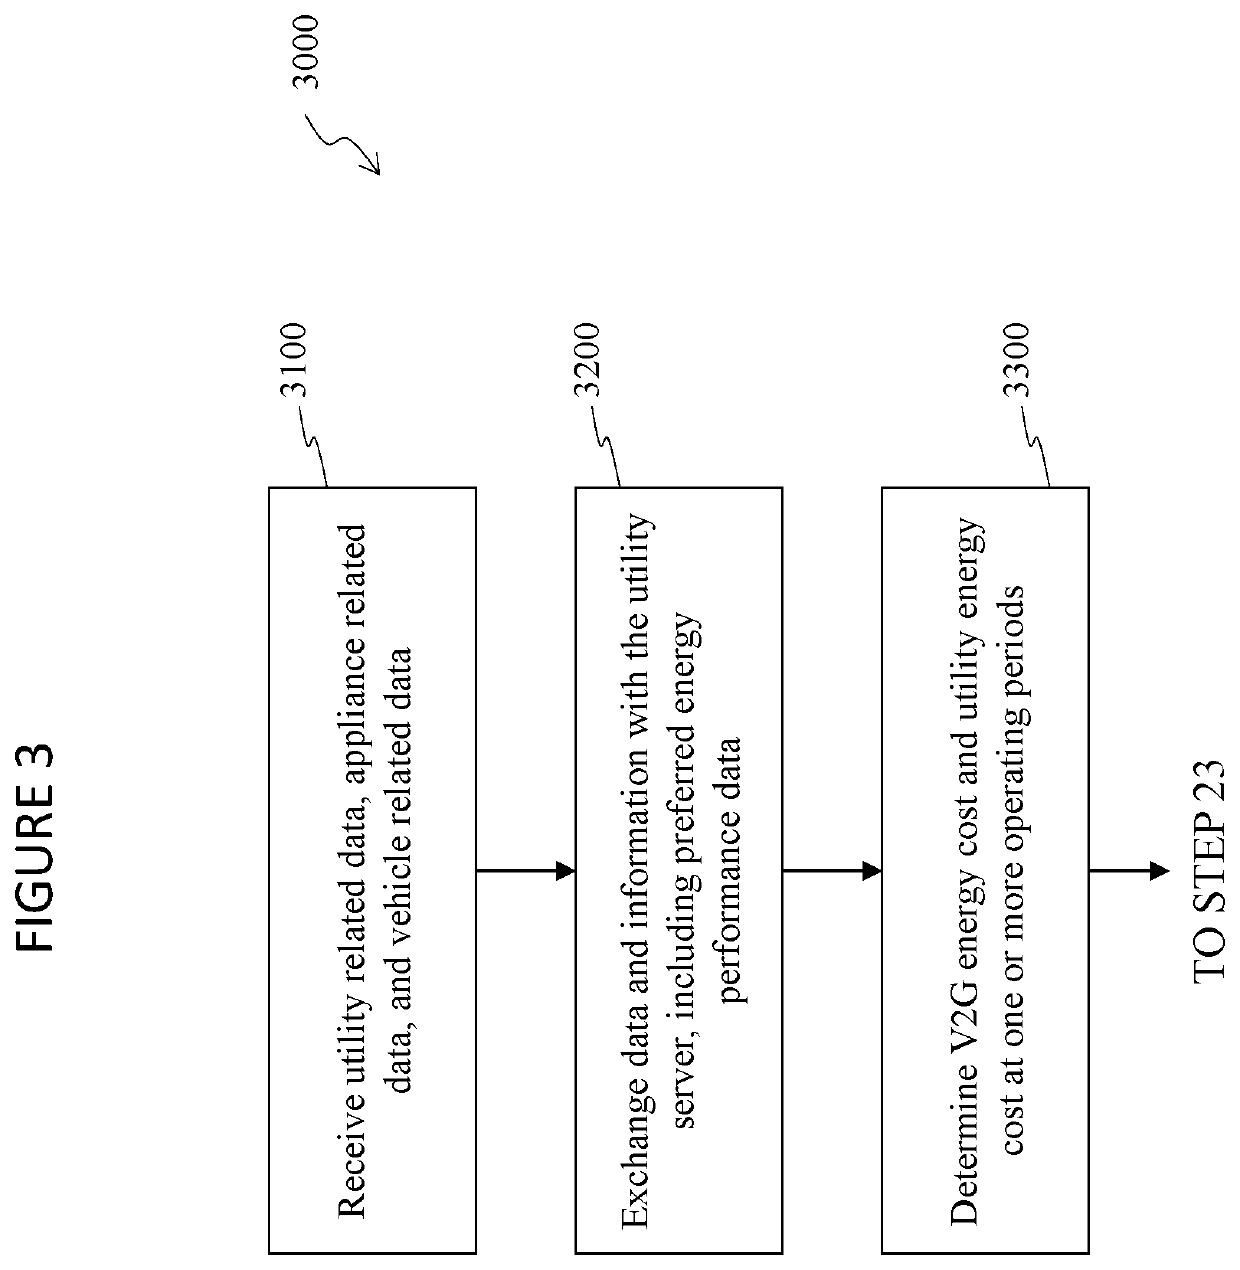 Systems and Methods for Integrating On-Premises Electric Appliances with Vehicle-To-Grid Electric Vehicles